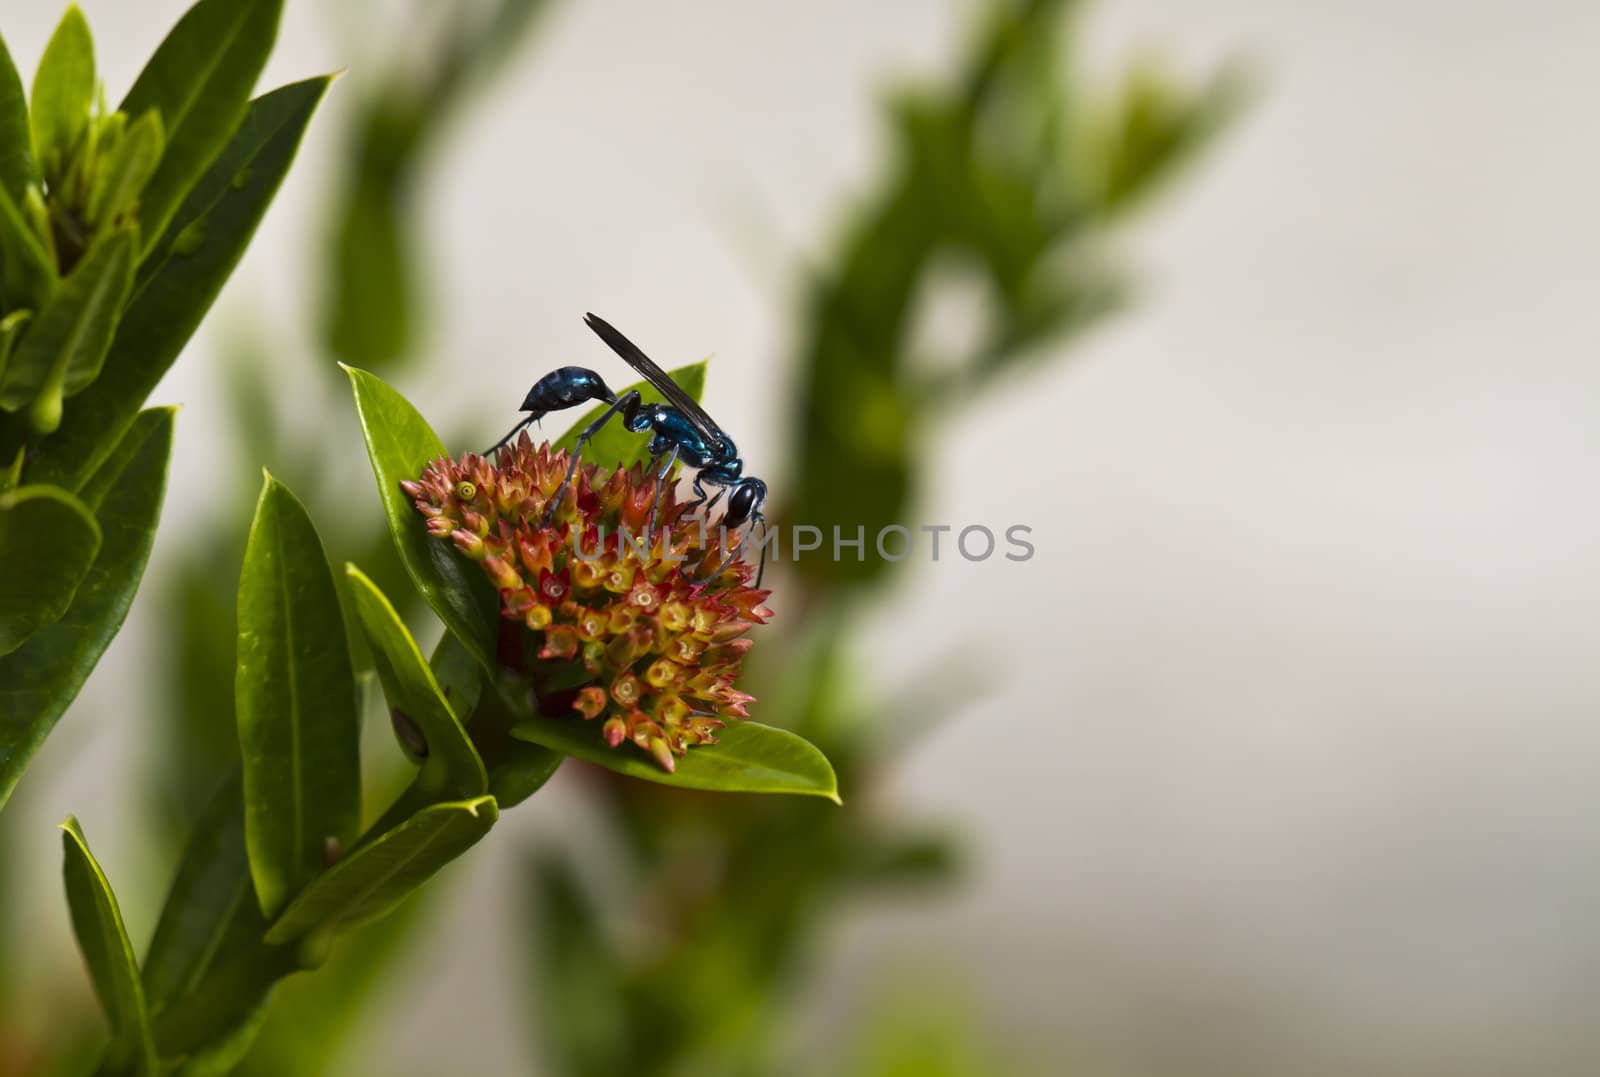 Blue wasp on ixora flower with blurry background